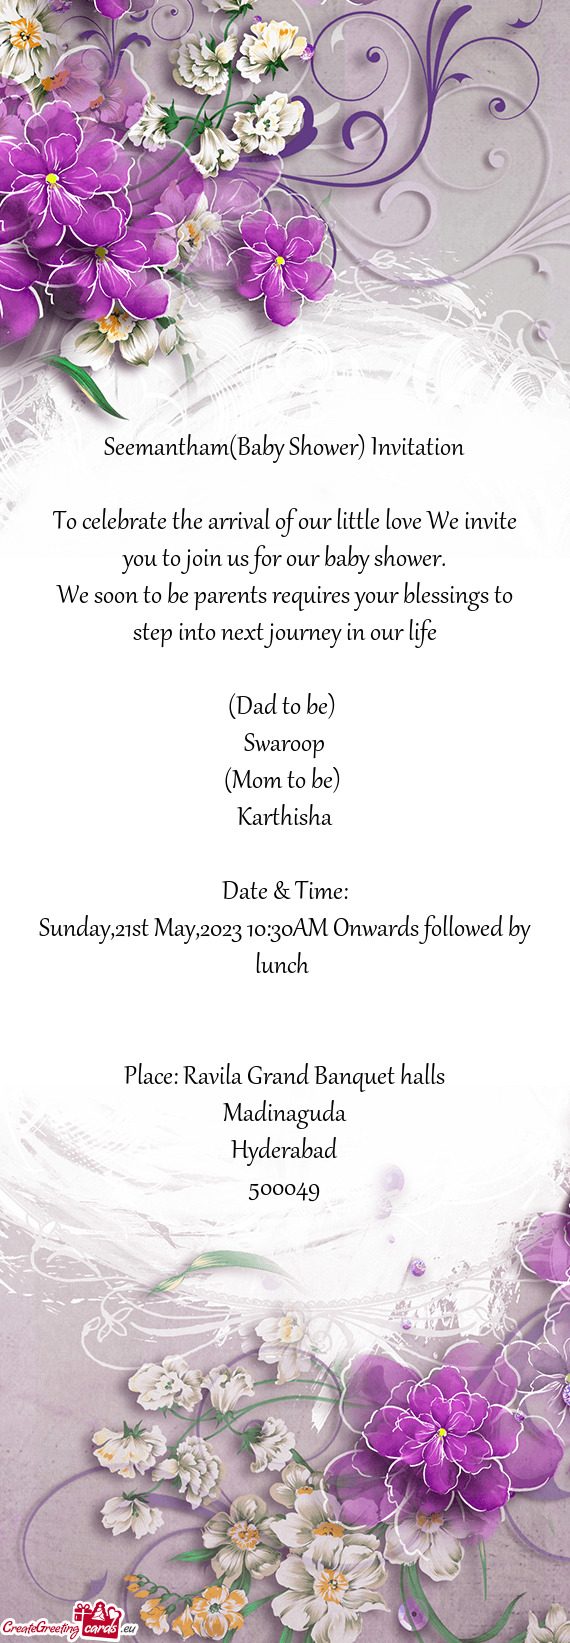 To celebrate the arrival of our little love We invite you to join us for our baby shower